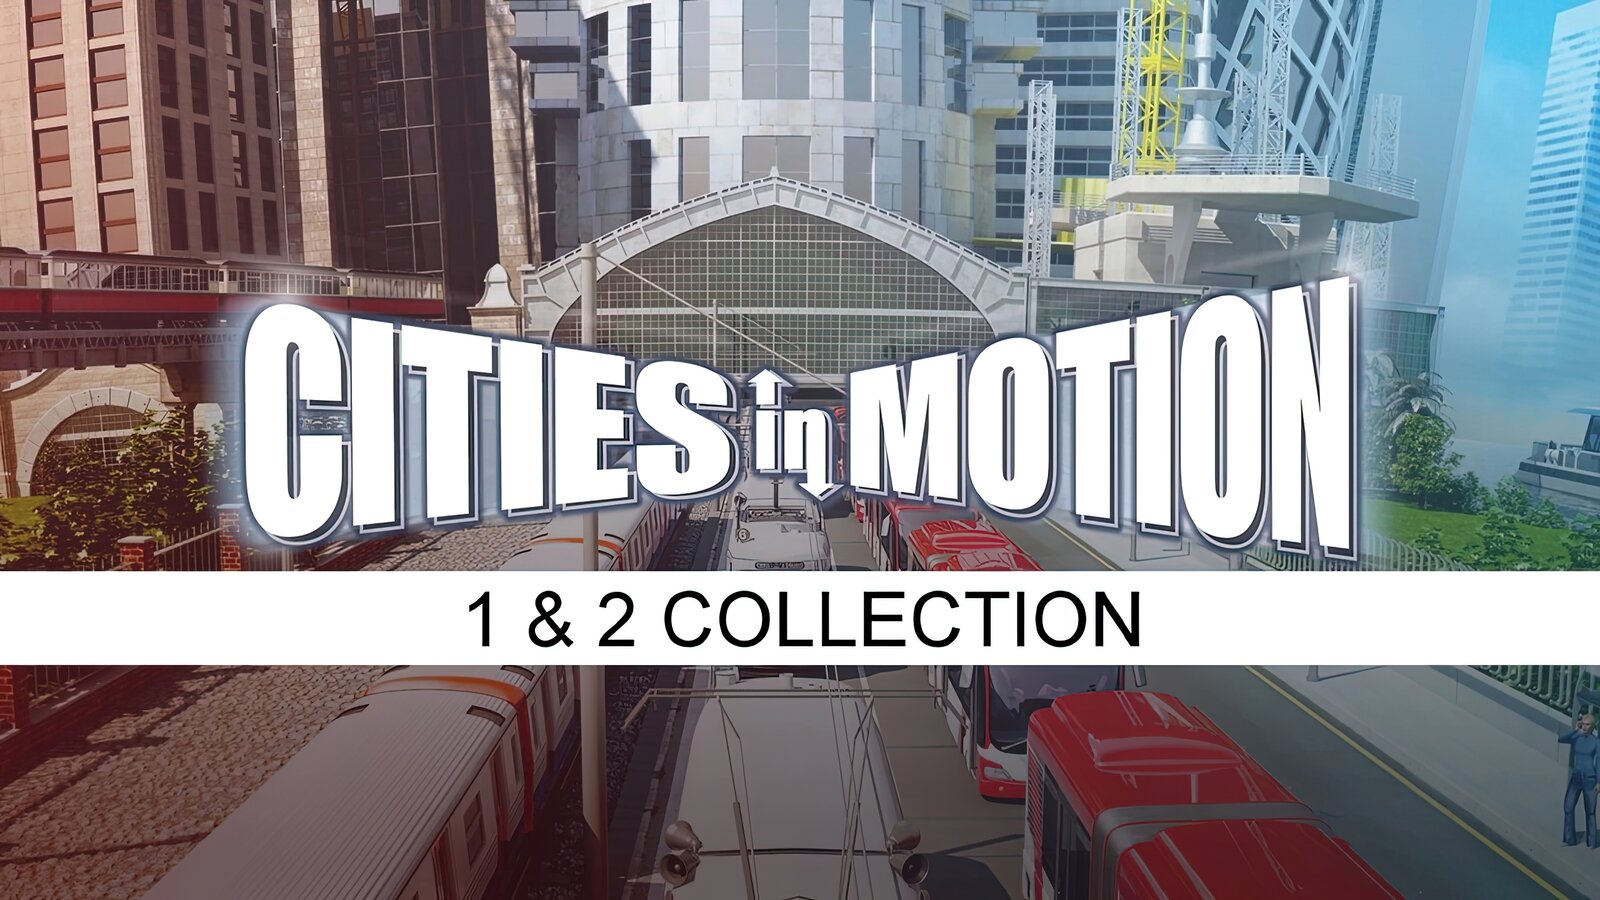 Cities in Motion 1 and 2 - Collection